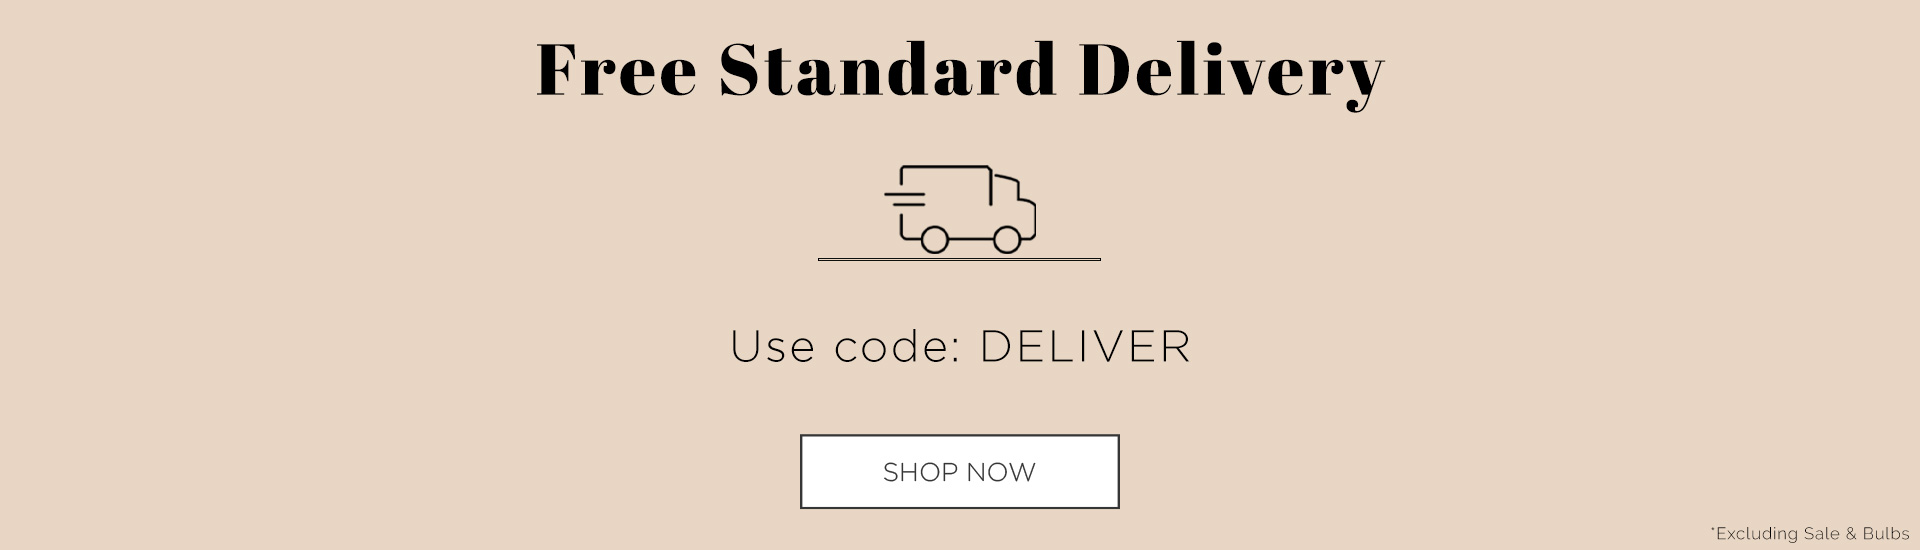 Free Standard Delivery  | Use Code: DELIVER | Shop Now